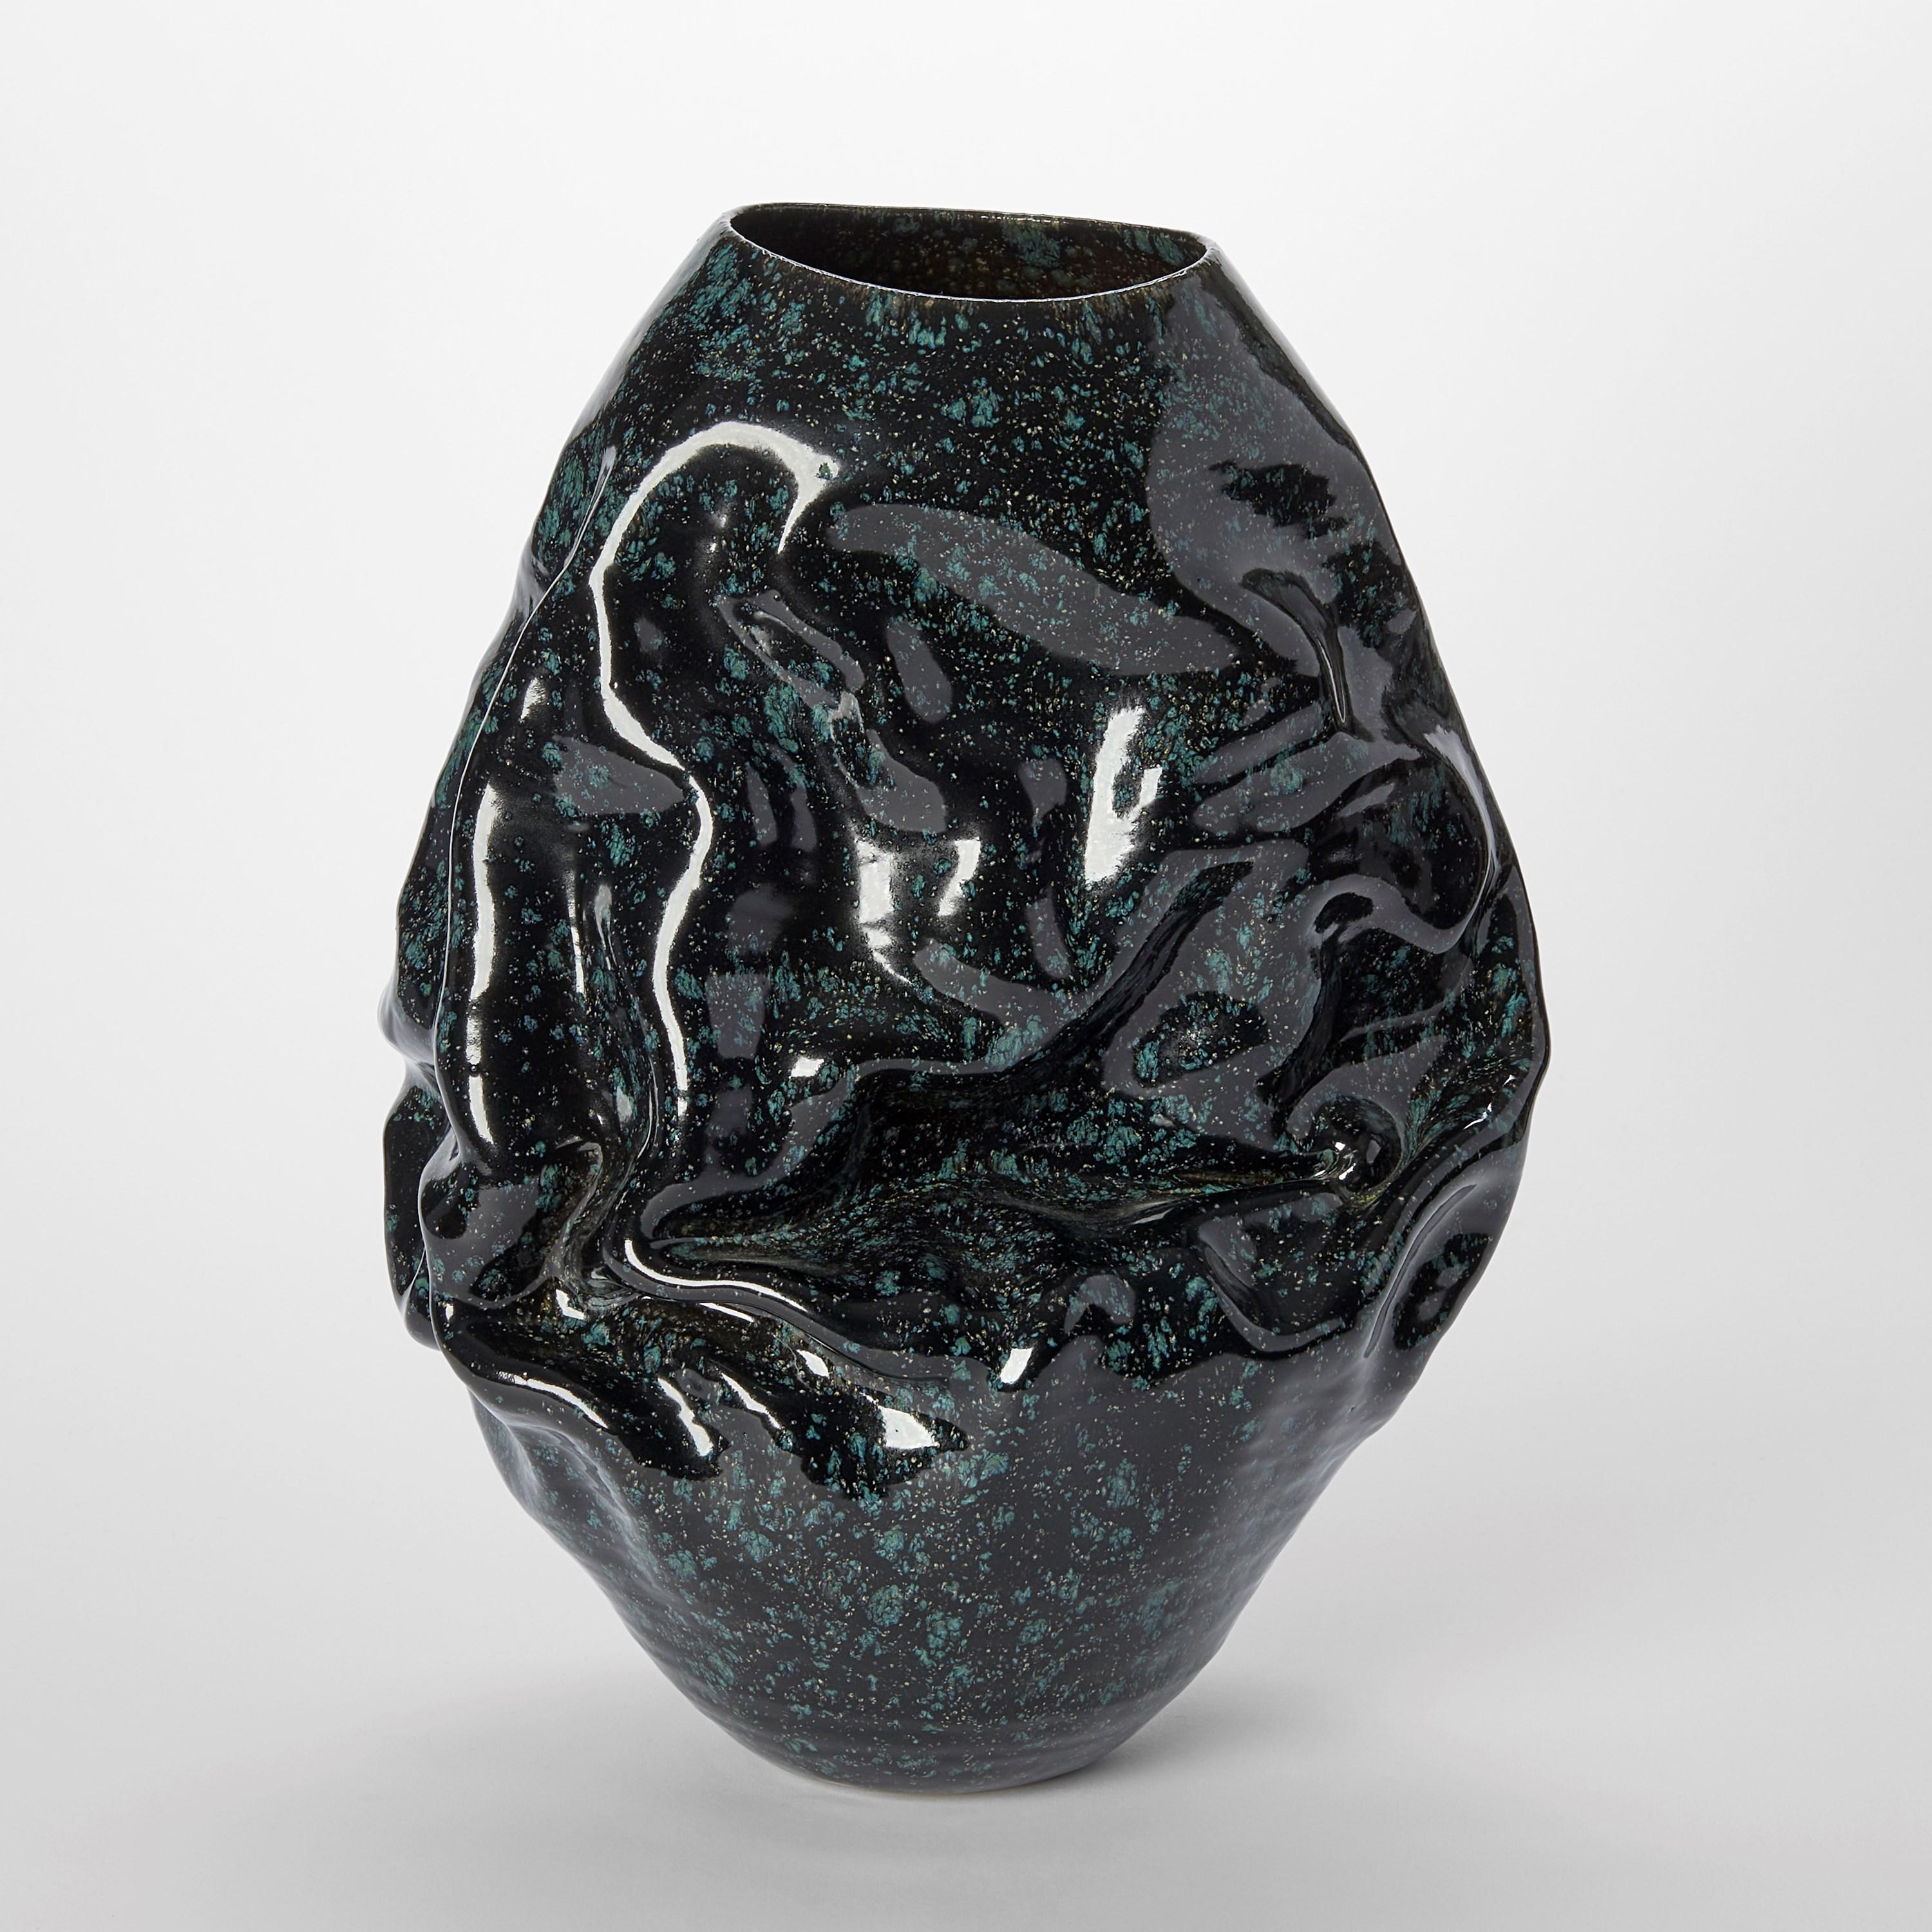 ‘Dehydrated Form with Cosmic Black Glaze No 115’ is a unique sculptural vessel by the British artist, Nicholas Arroyave-Portela.

Nicholas Arroyave-Portela’s professional ceramic practise began in 1994. After 20 years based in London, he moved and